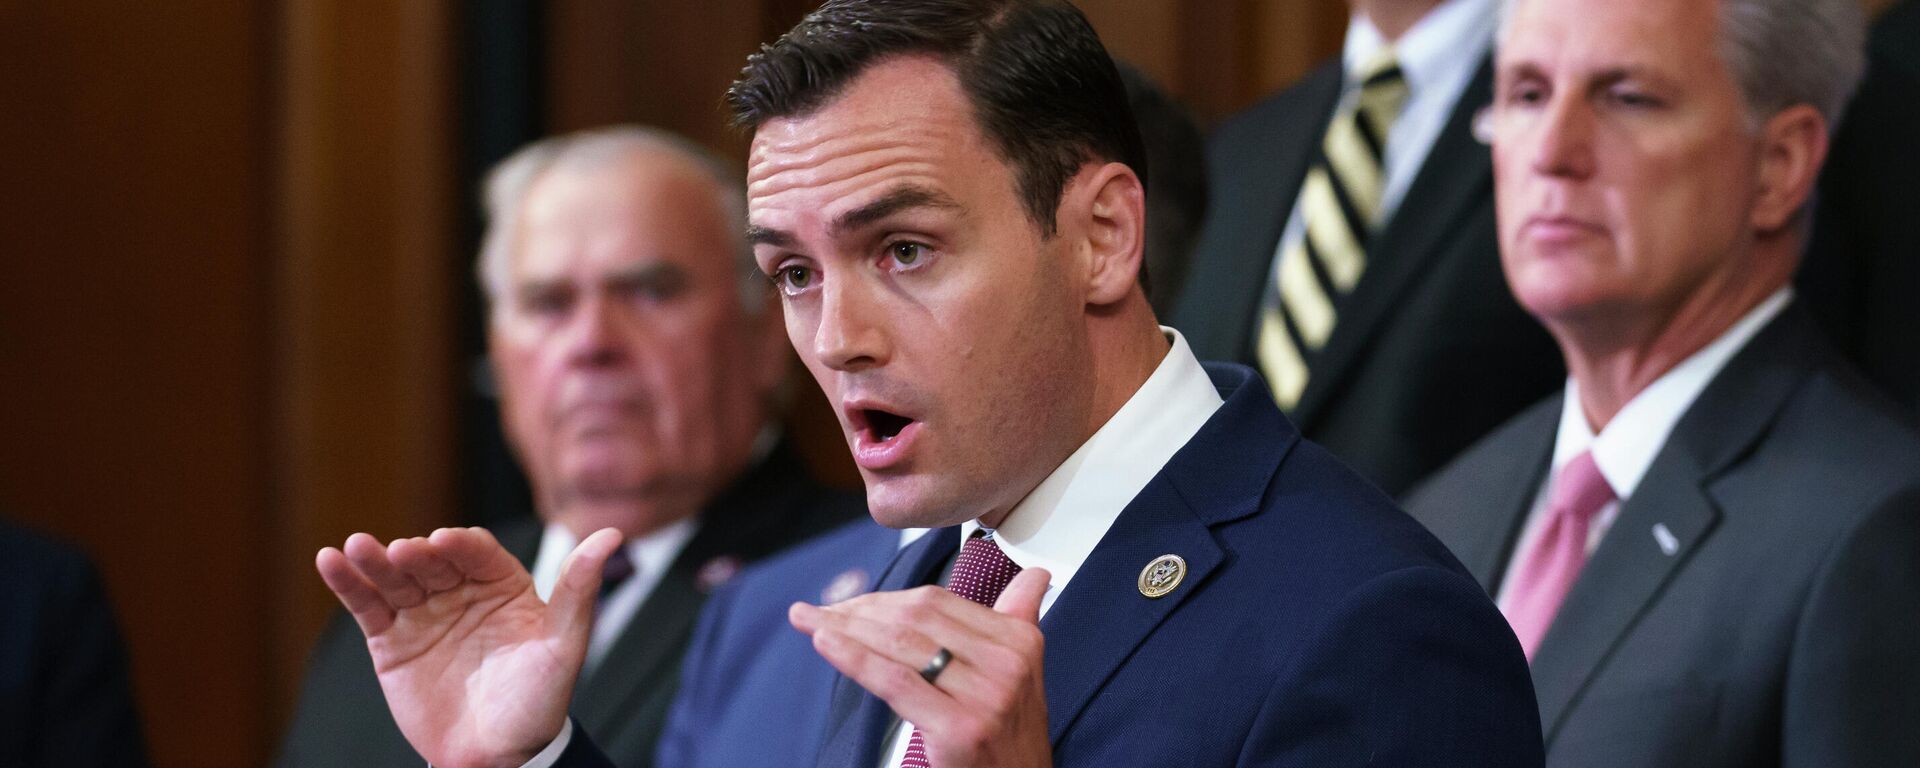 Rep. Mike Gallagher, R-Wis., a former Marine, joins House Minority Leader Kevin McCarthy, R-Calif., right, and other GOP members to criticize President Joe Biden and House Speaker Nancy Pelosi on the close of the war in Afghanistan, at the Capitol in Washington, Tuesday, Aug. 31, 2021. - Sputnik International, 1920, 18.10.2022